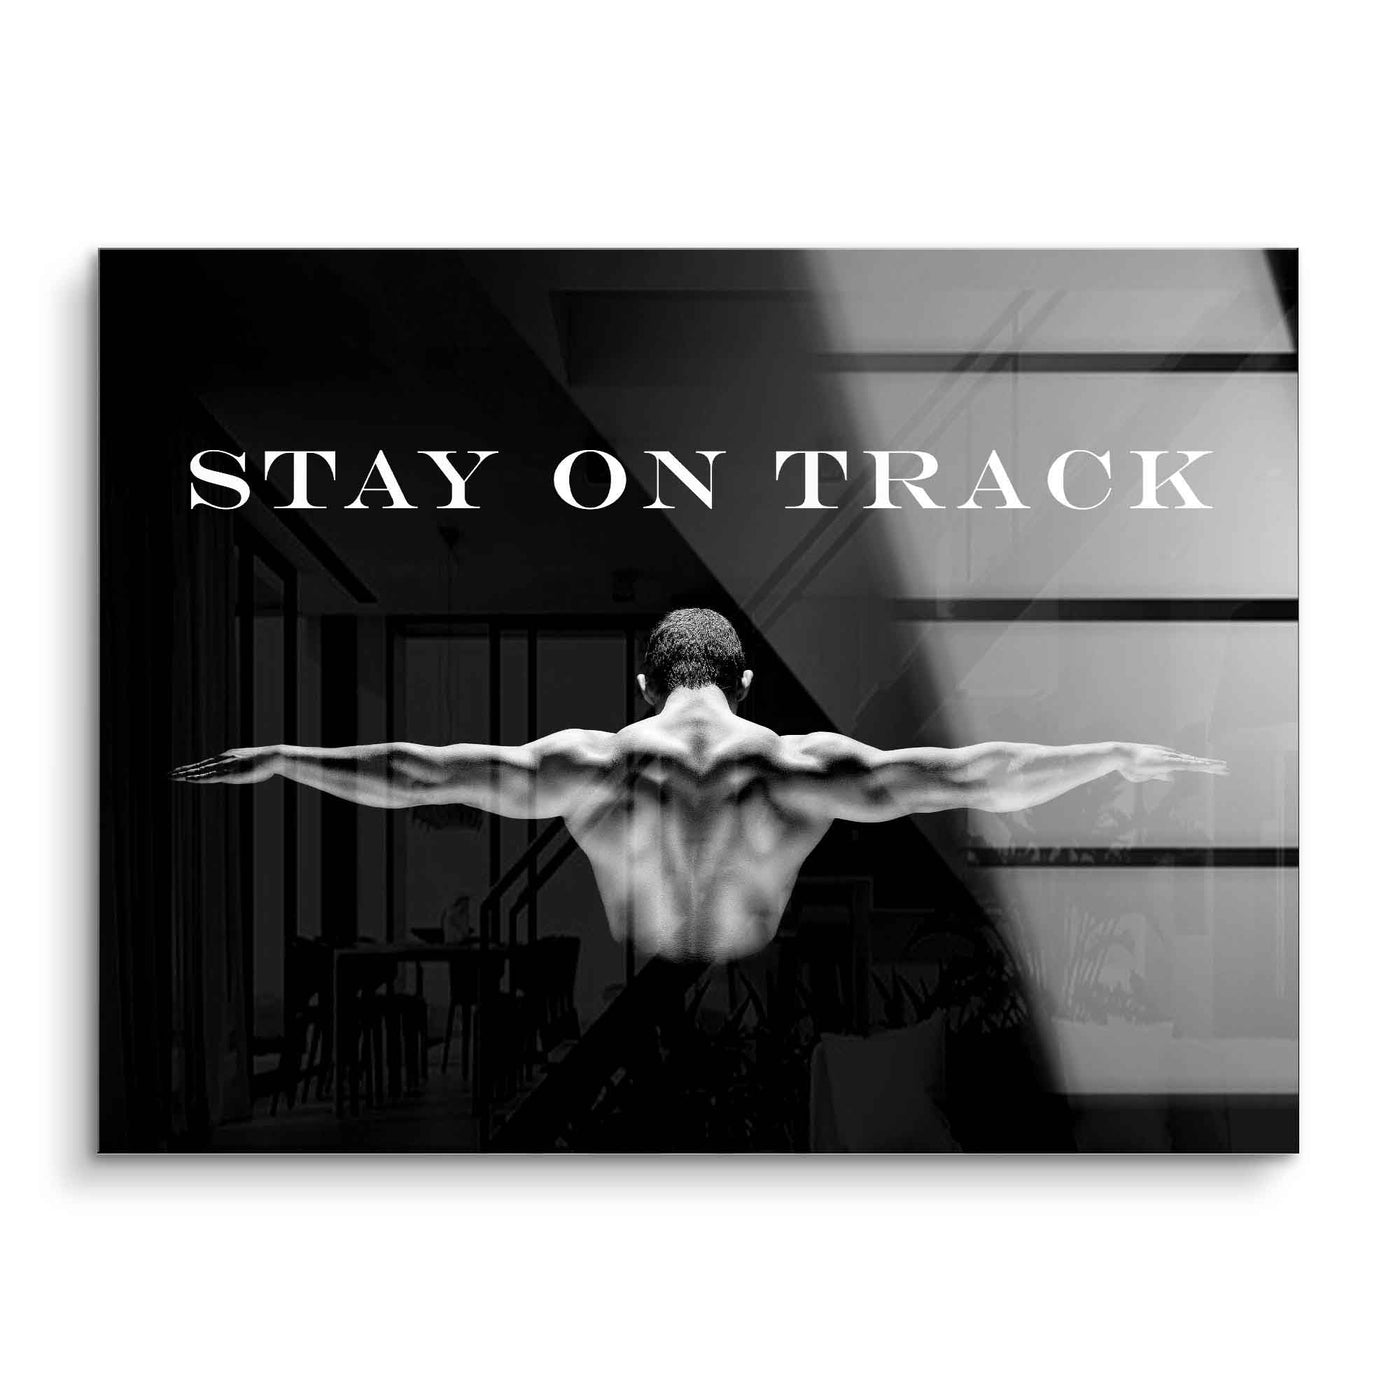 Stay on track